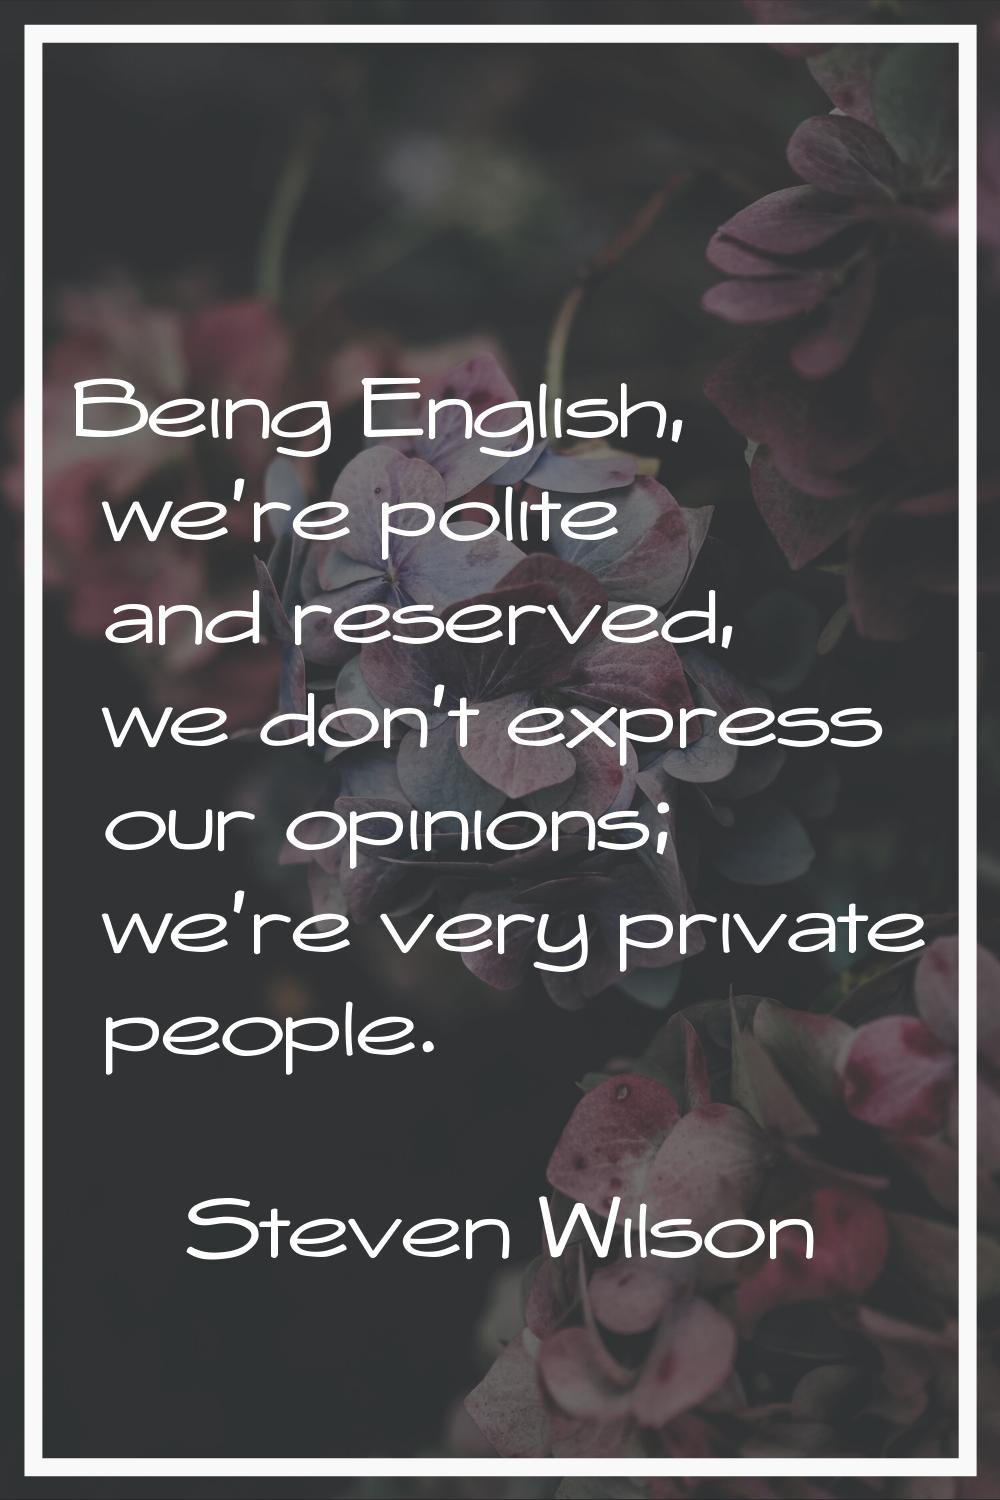 Being English, we're polite and reserved, we don't express our opinions; we're very private people.